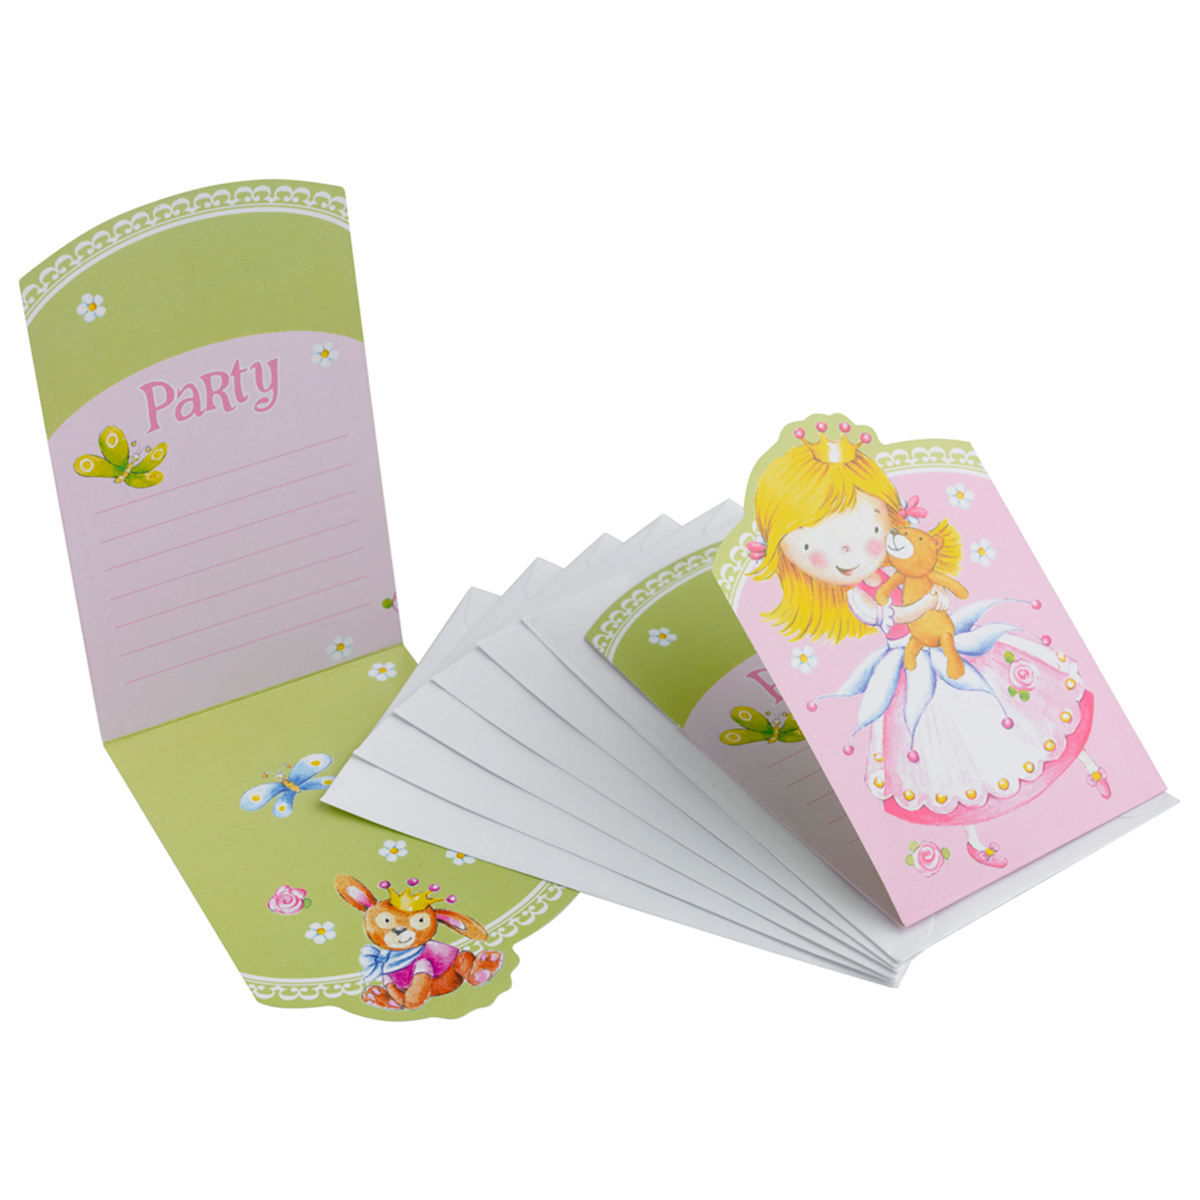 Sweet Little Princess Invitations And Envelopes 6pcs Party Accessories - Party Centre